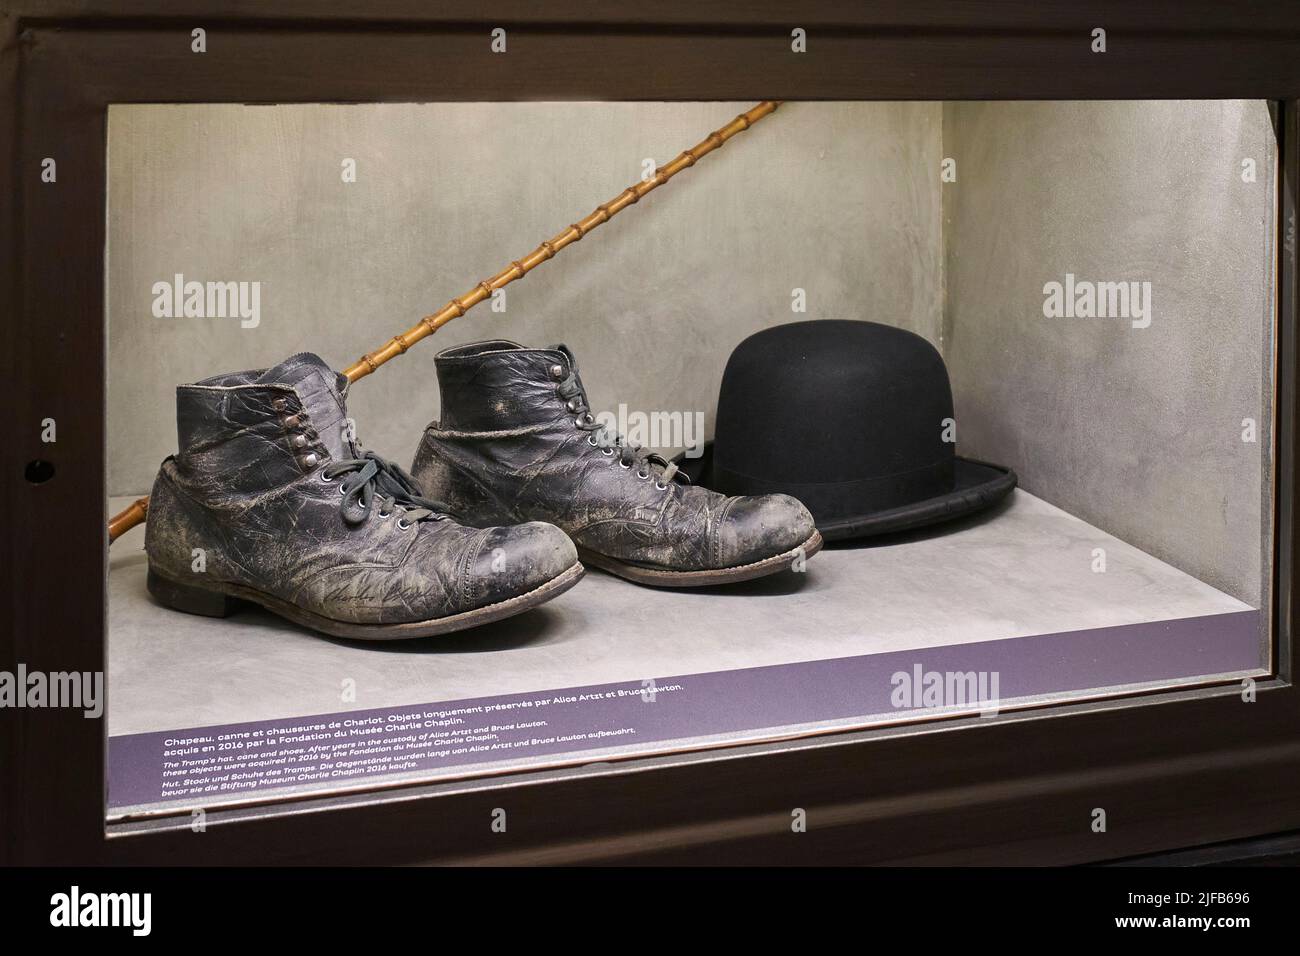 Switzerland, Canton of Vaud, Corsier sur Vevey, Chaplin's World Museum, hollywood studio, Charlot's hat, cane and shoes Stock Photo